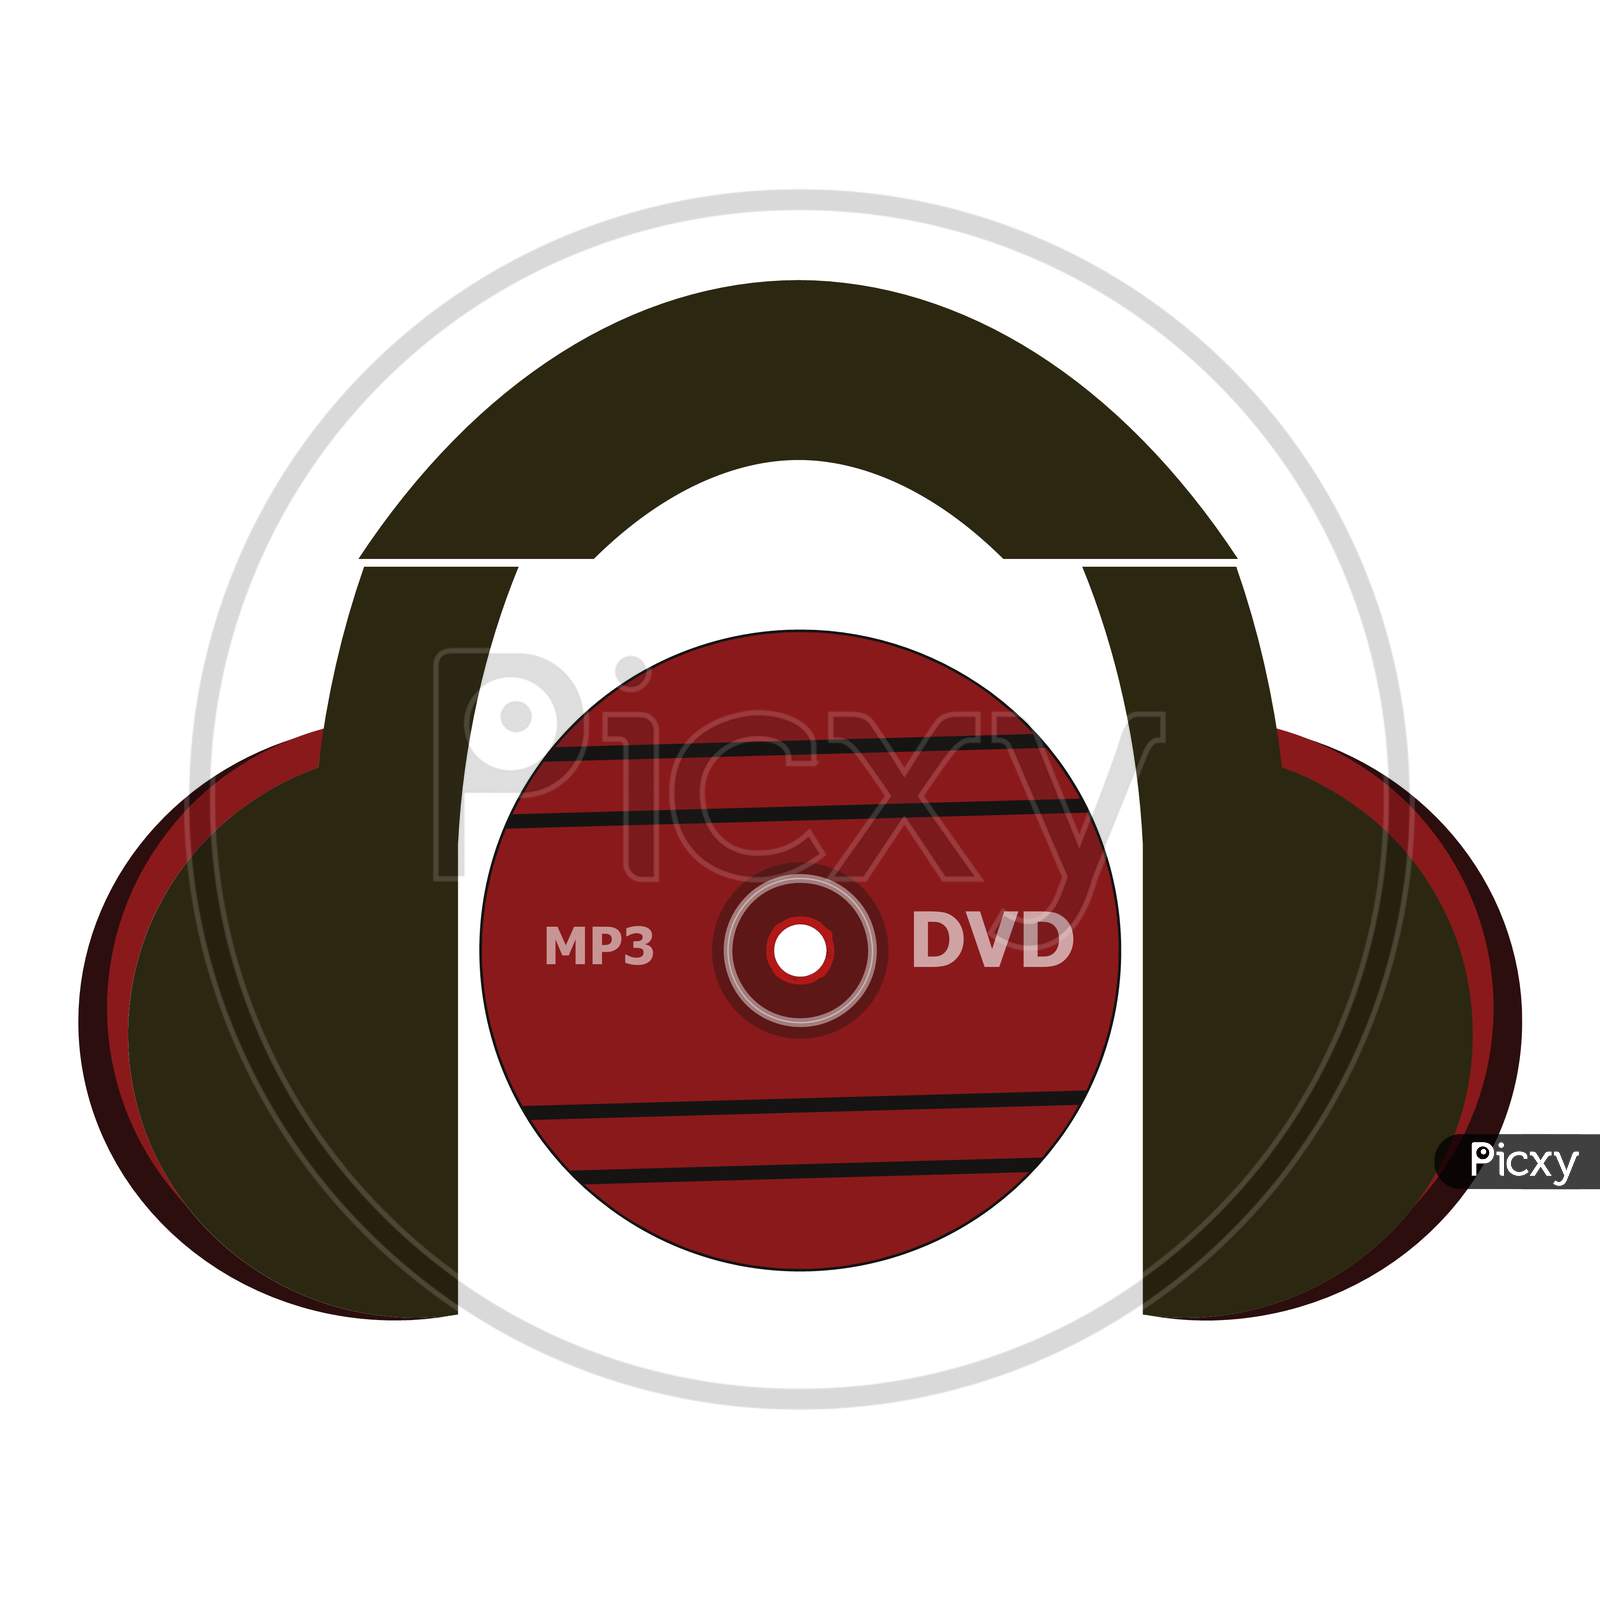 Black Headphone Computer Graphics With A Red Music Dvd. Isolated Music Gadgets On White Background.